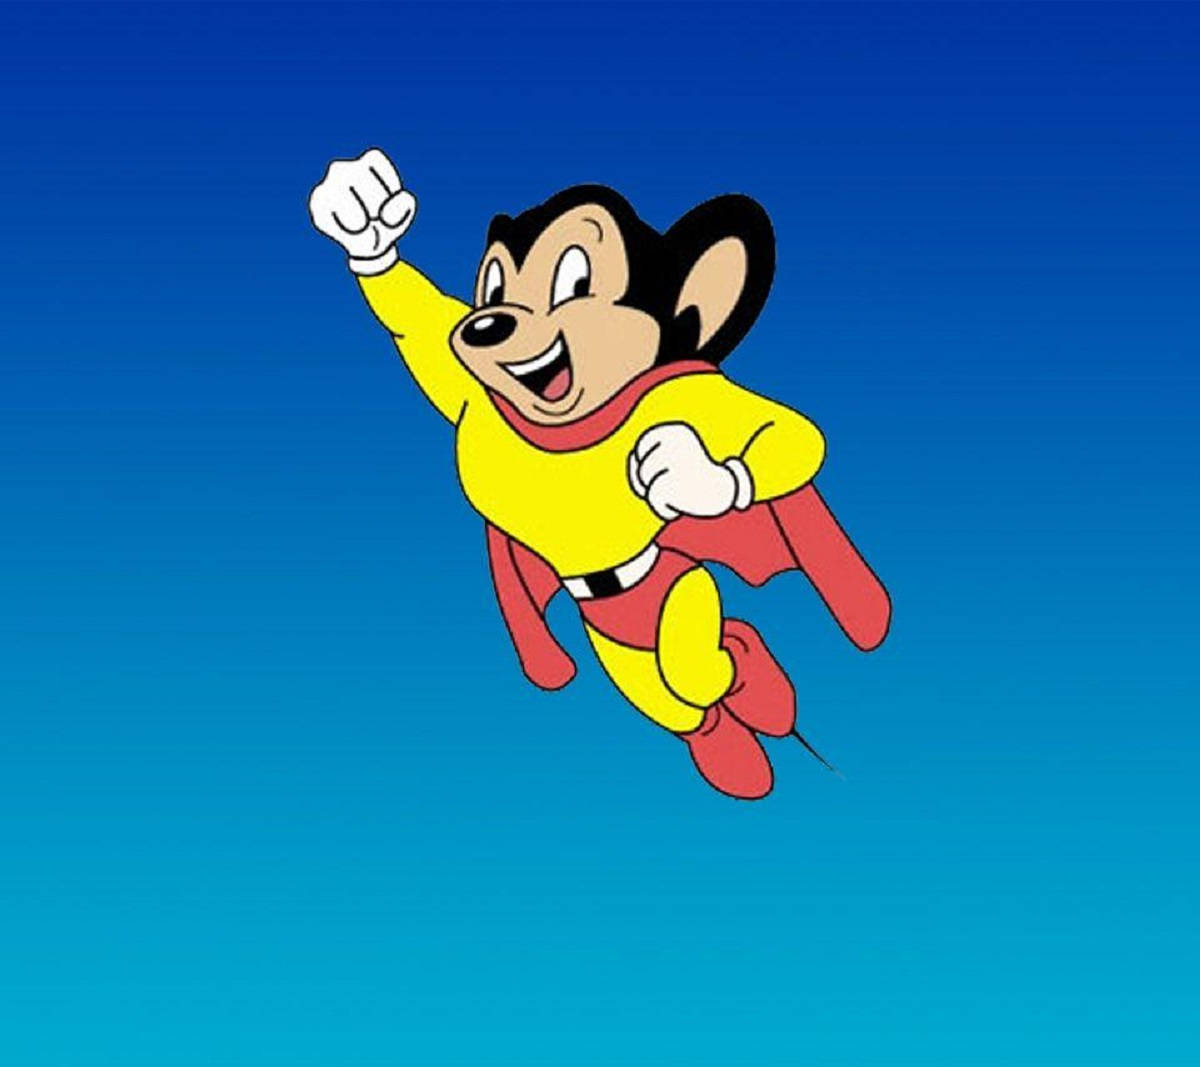 Classic Mighty Mouse Cartoon Pose